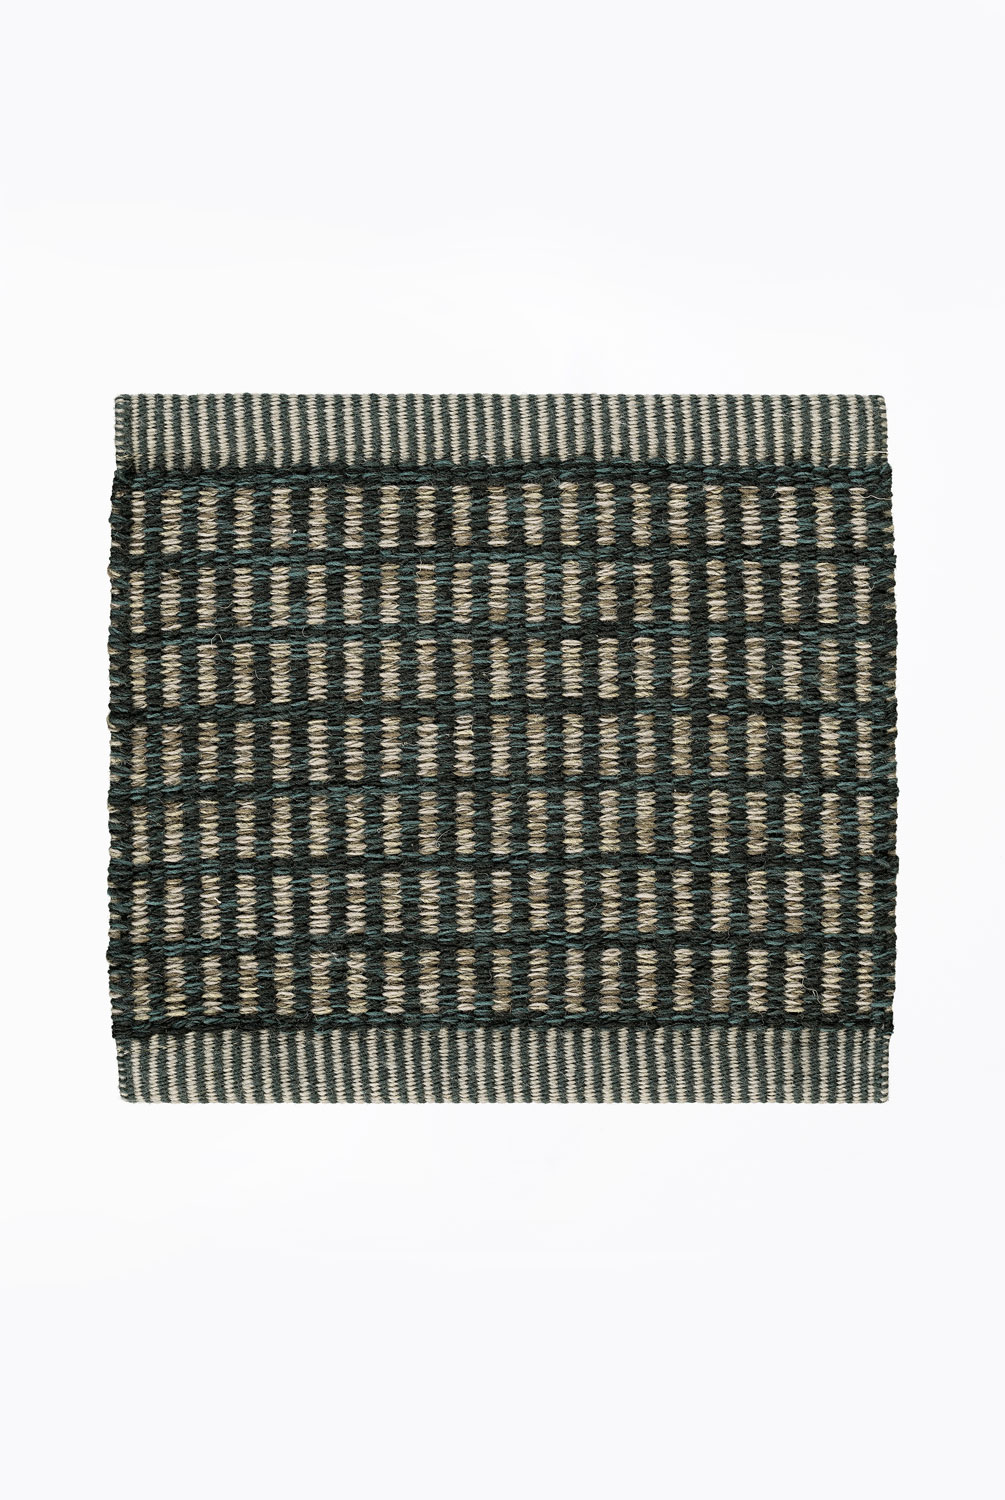 Kasthall Post Icon Evening Blue woven rug